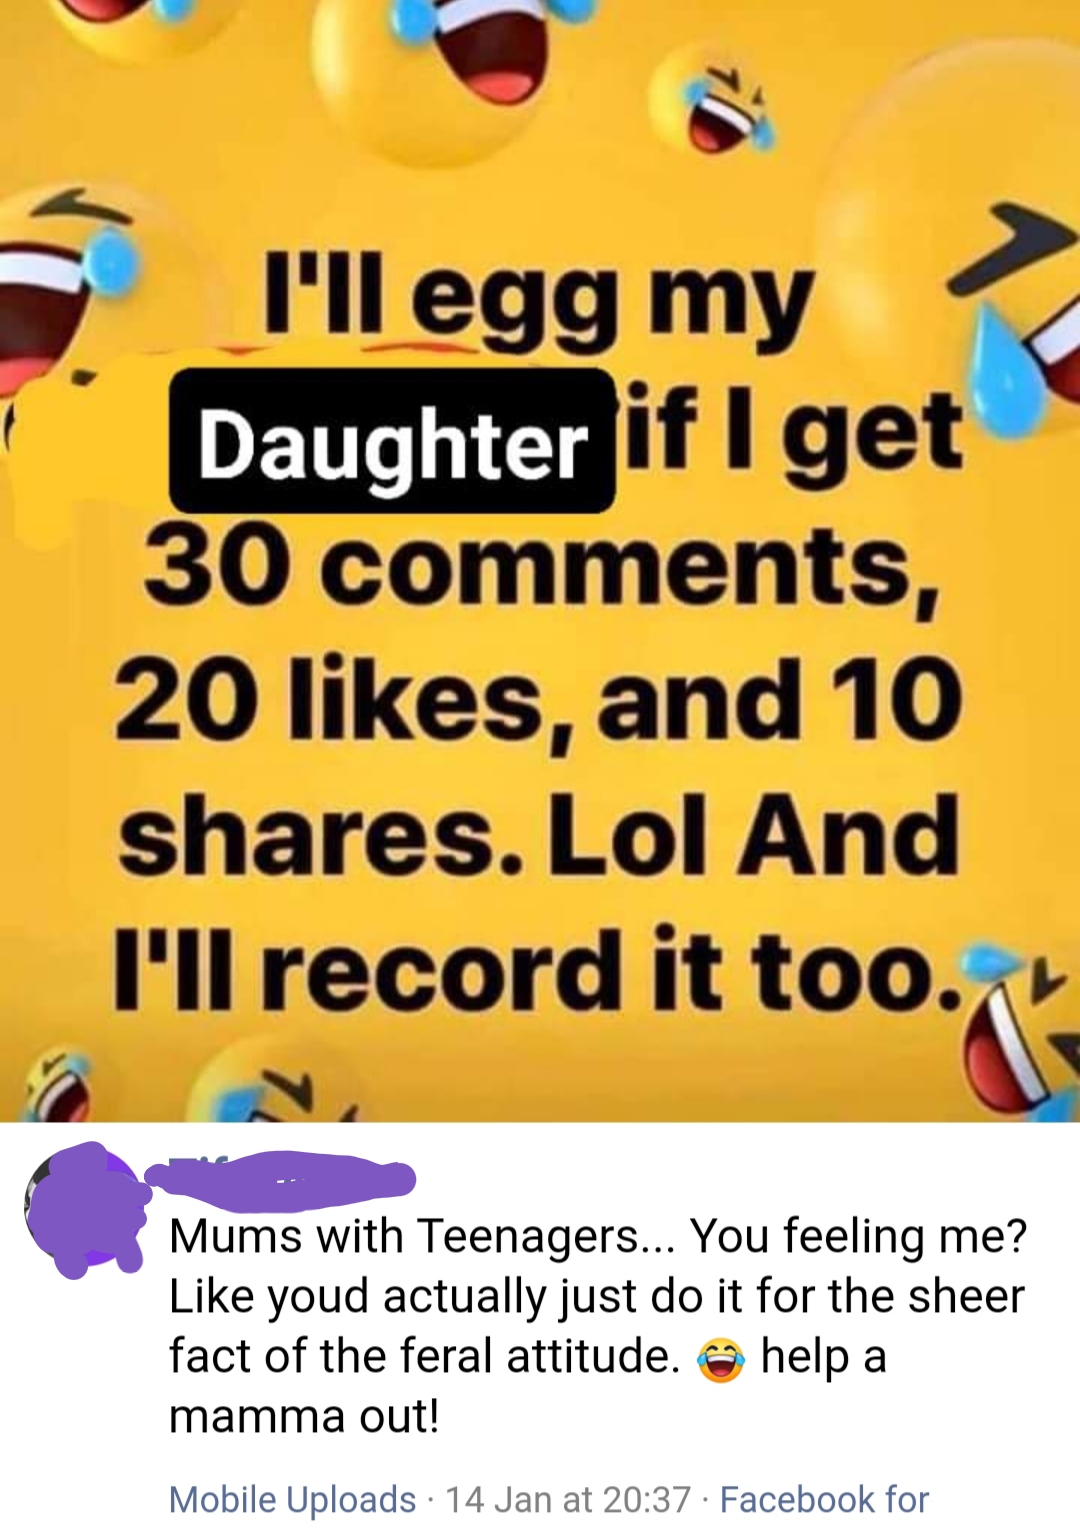 happiness - I'll egg my Daughter if I get 30 , 20 , and 10 . Lol And I'll record it too., Mums with Teenagers... You feeling me? youd actually just do it for the sheer fact of the feral attitude. help a mamma out! Mobile Uploads 14 Jan at . Facebook for